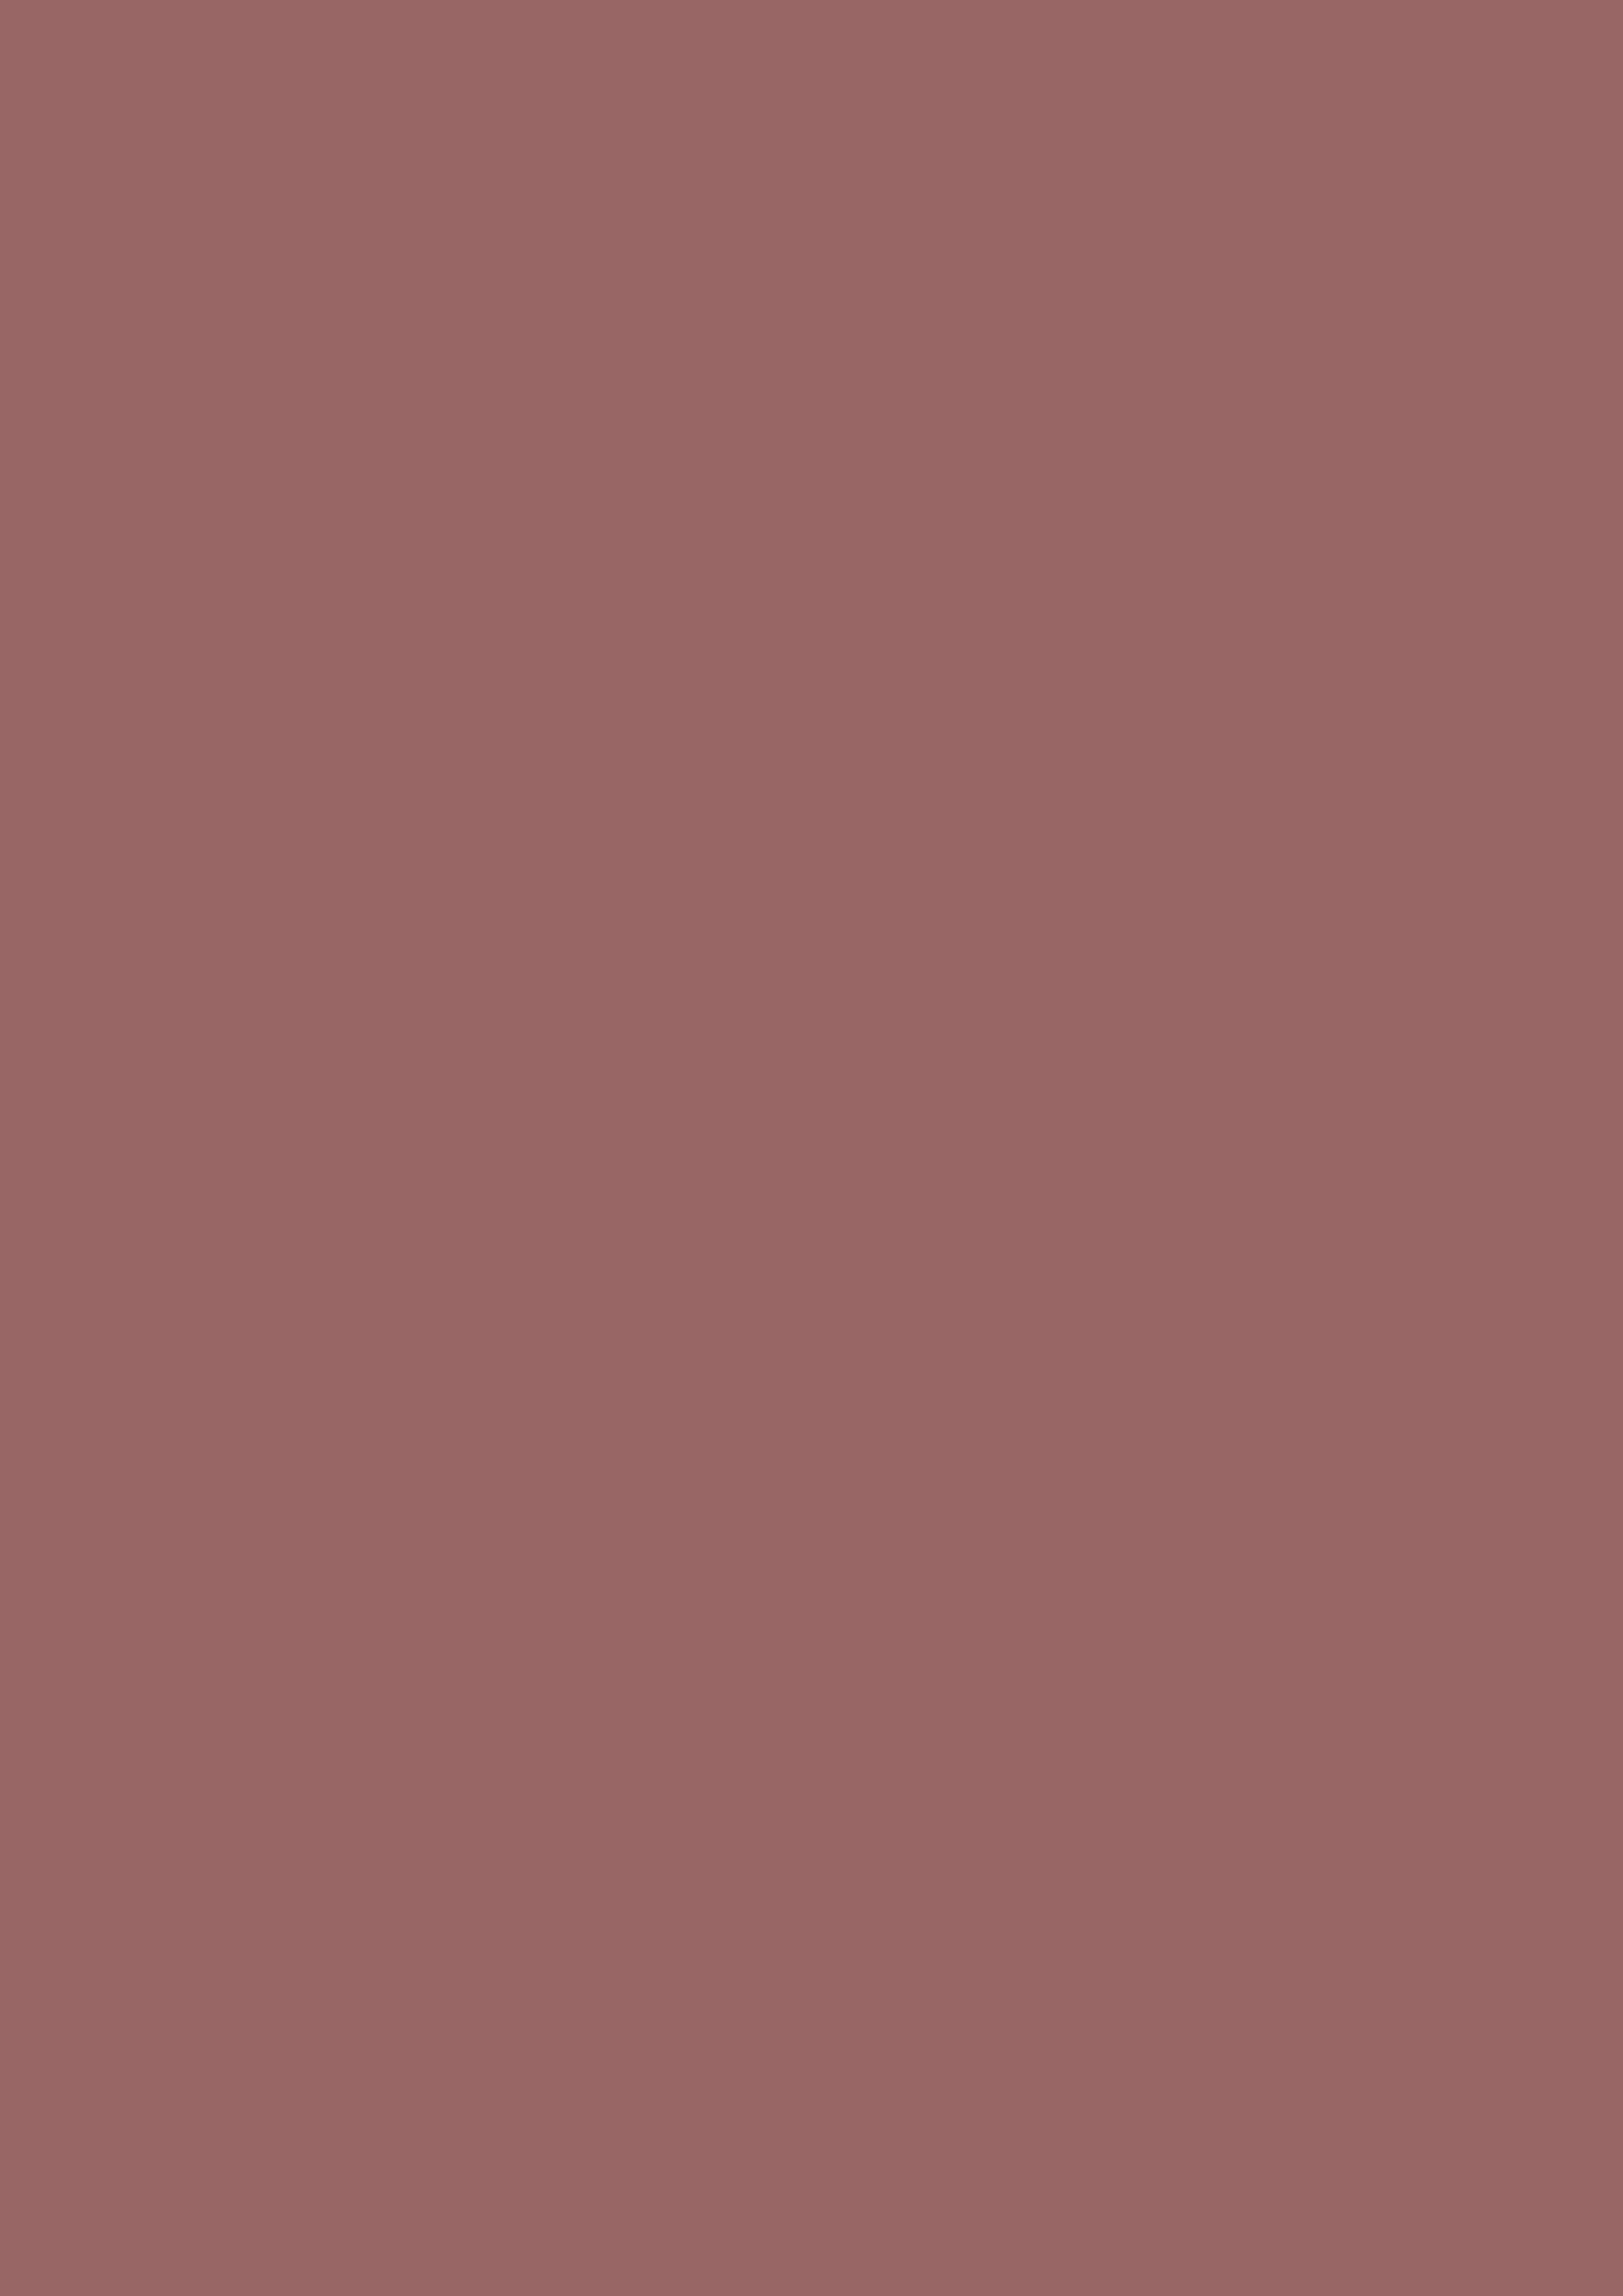 2480x3508 Copper Rose Solid Color Background